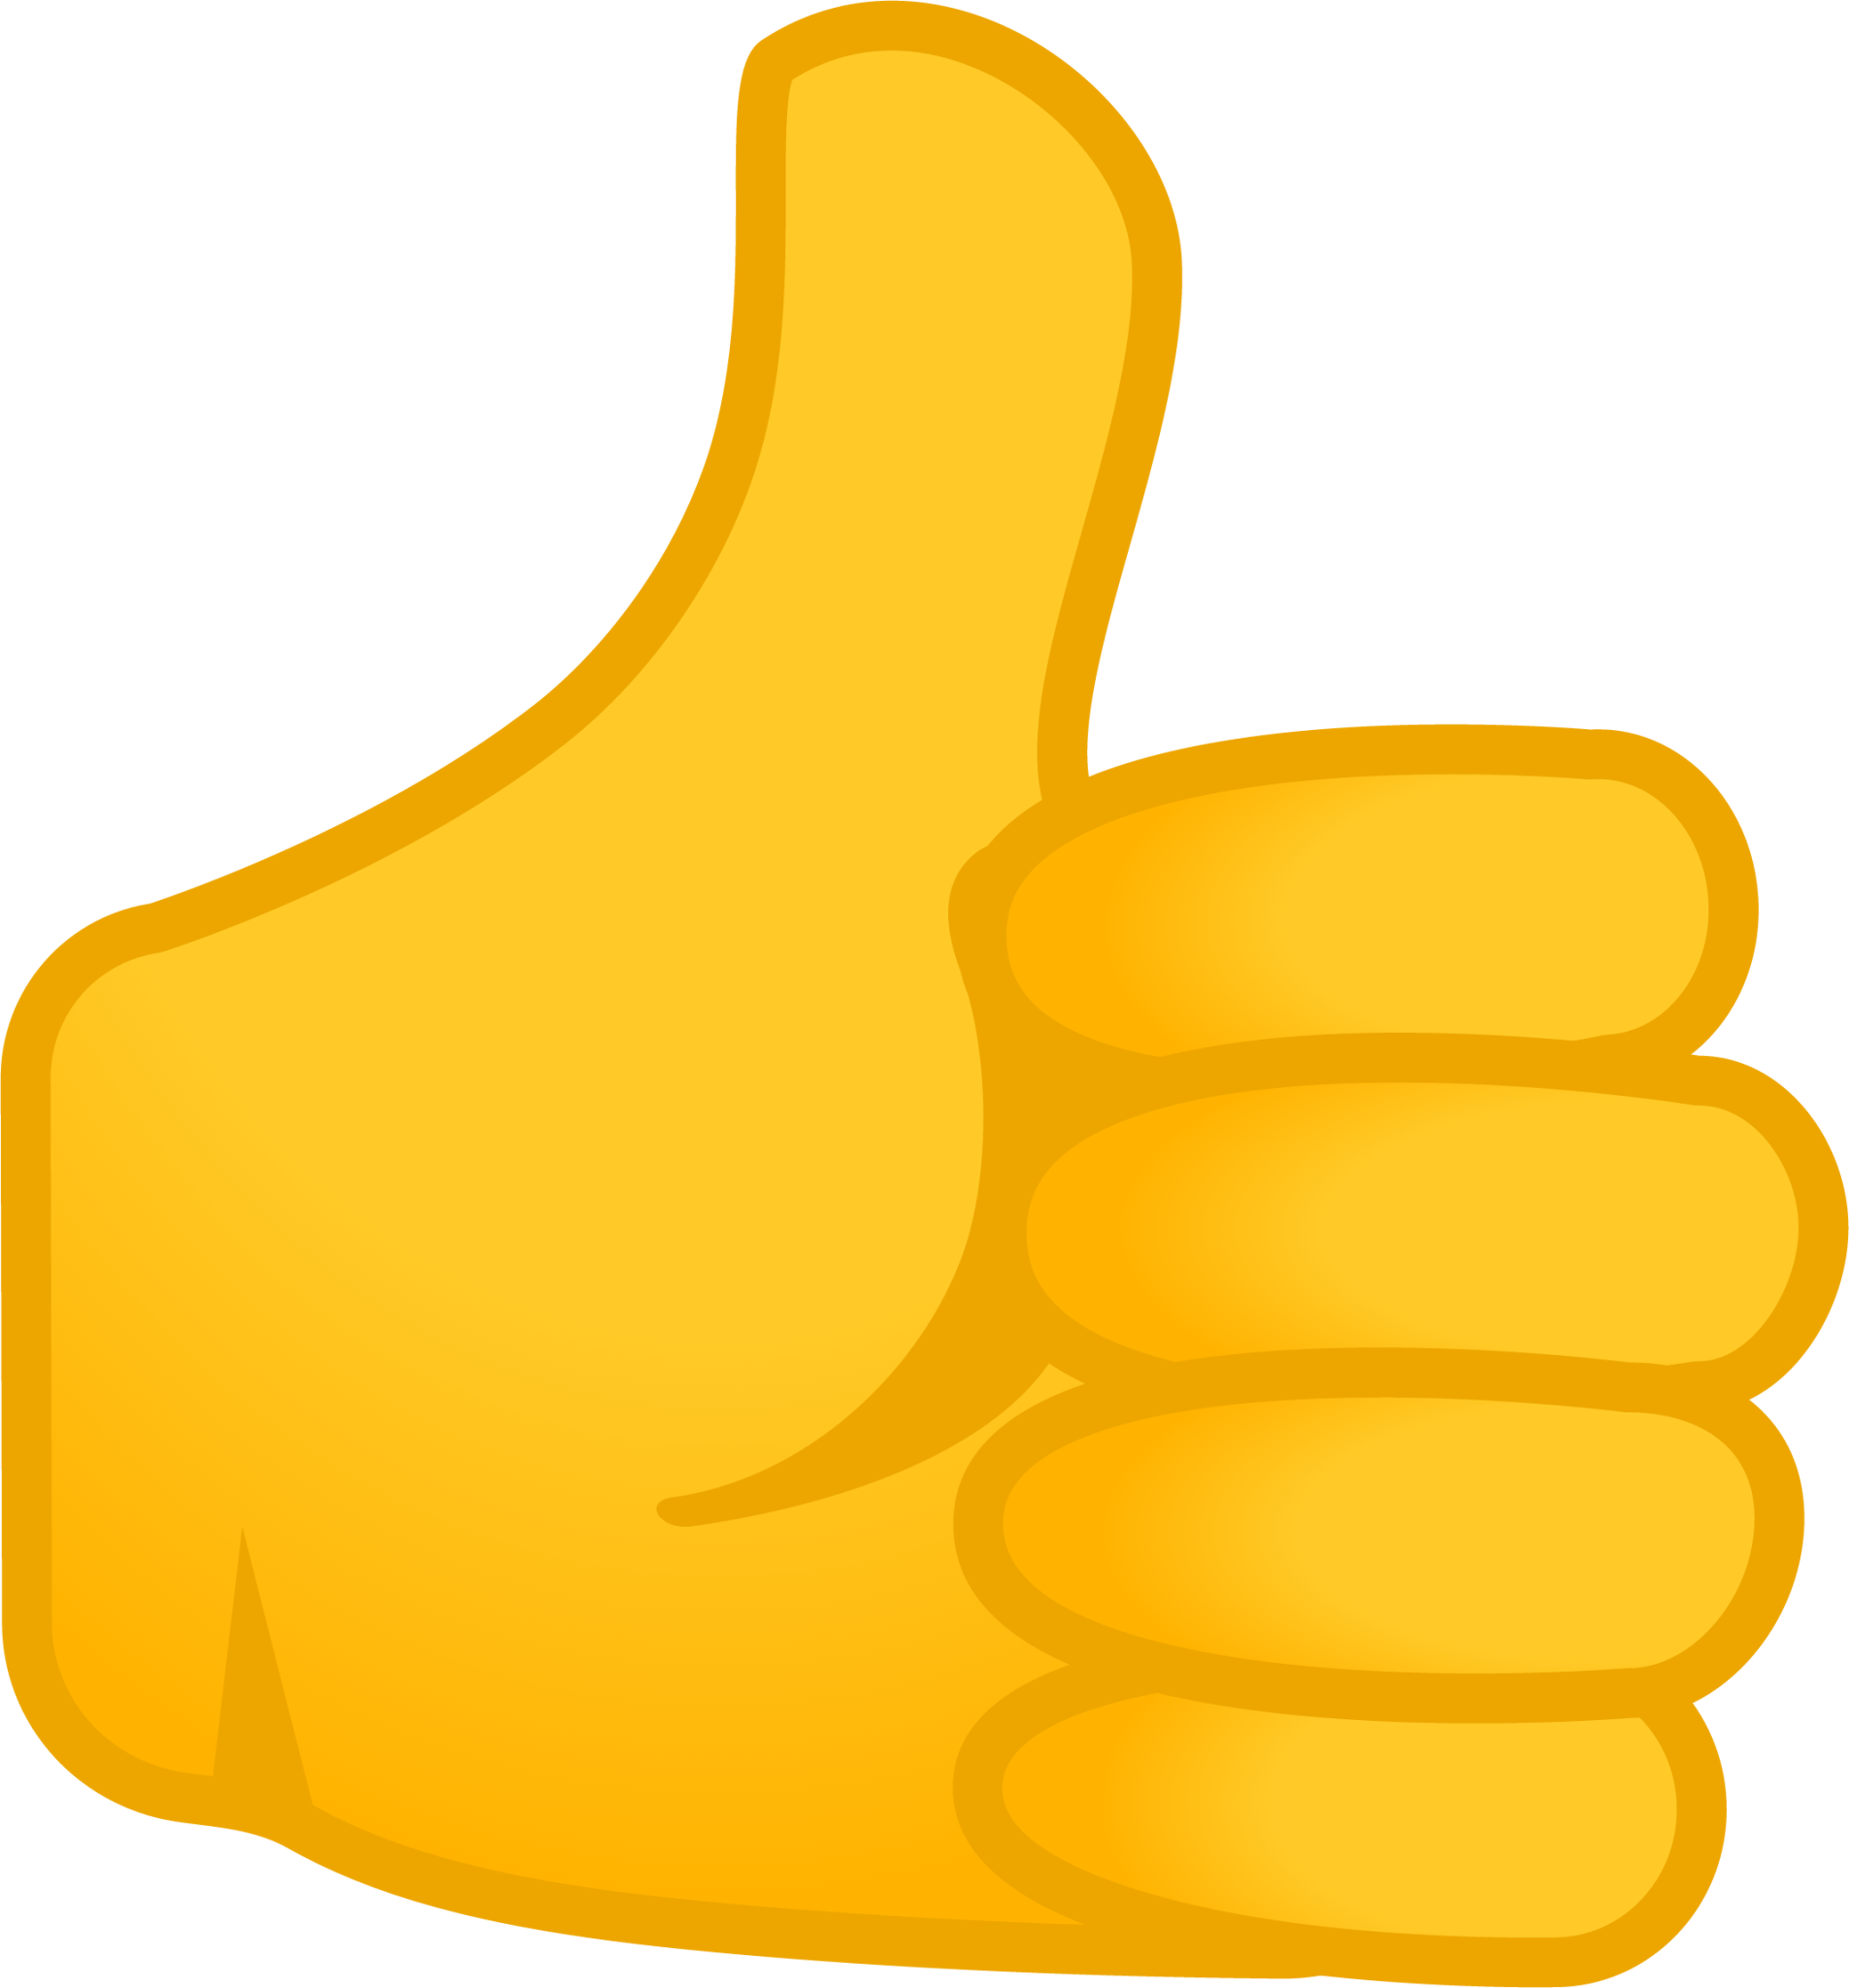 Free Green Thumbs Up SVG, PNG Icon, Symbol. Download Image.